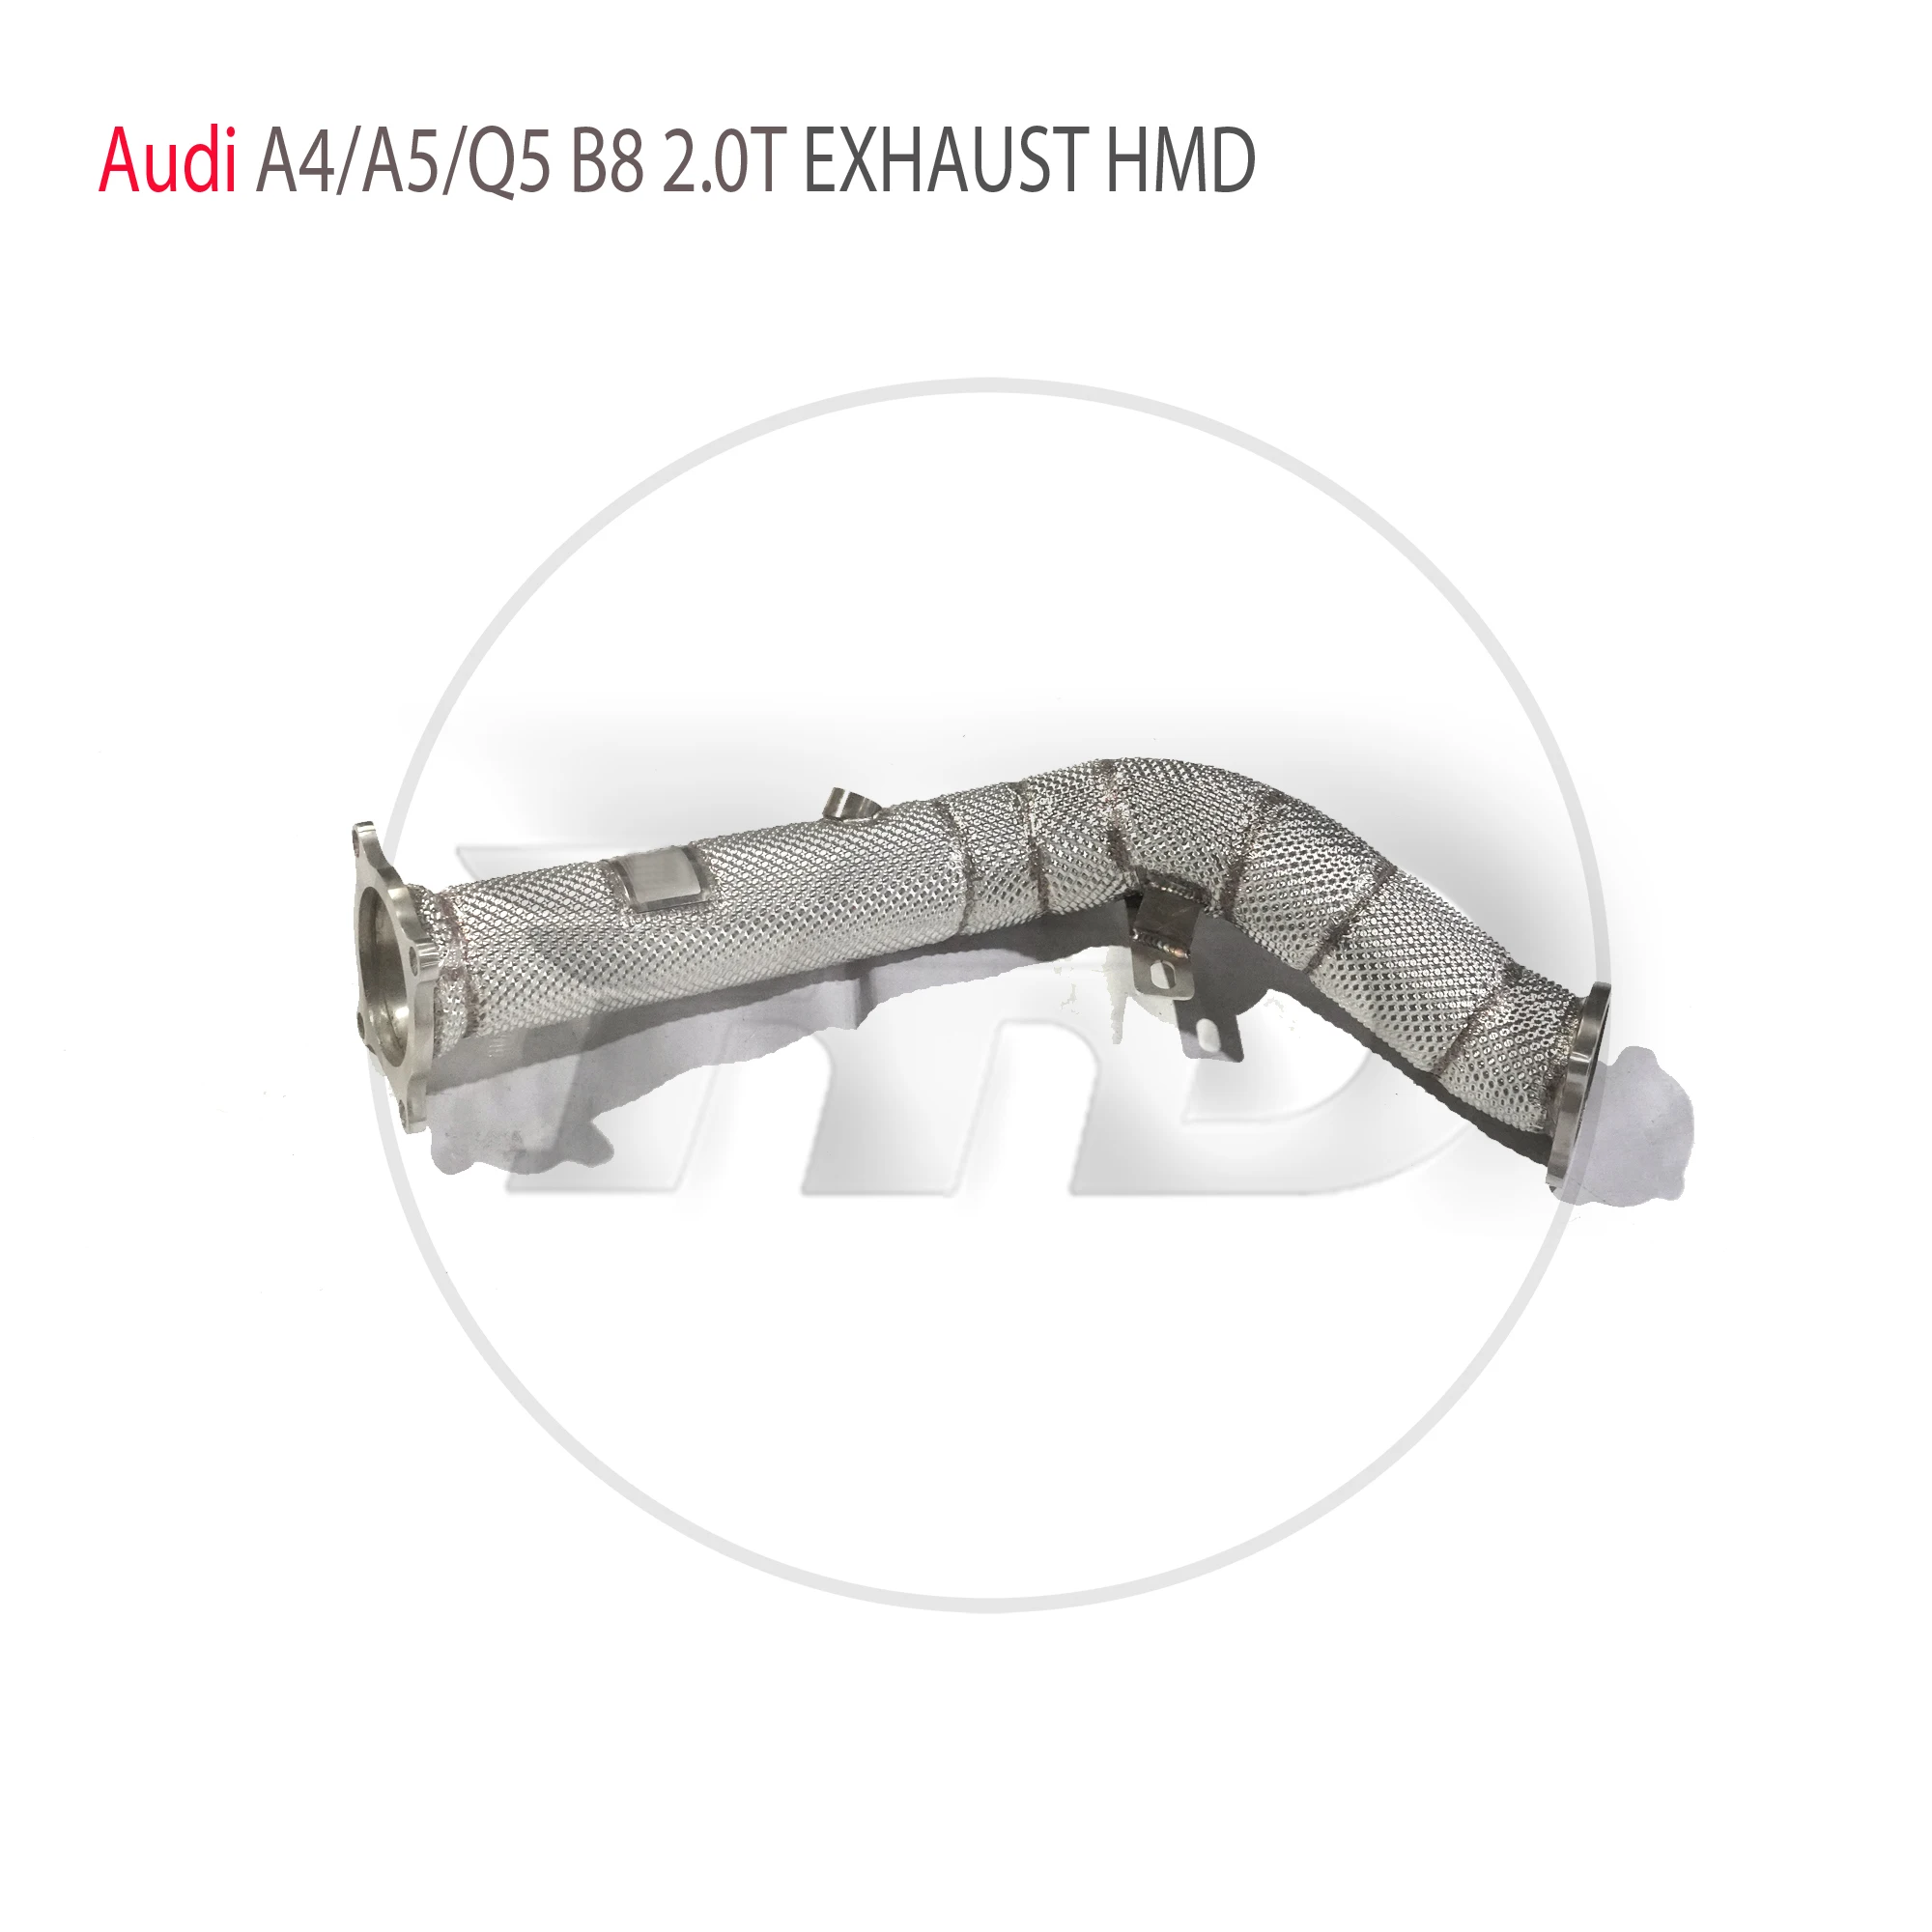 

HMD Exhaust System High Flow Performance Downpipe for Audi A4 A5 Q5 B8 2.0T Without Catalyst Converter Header Racing Pipe